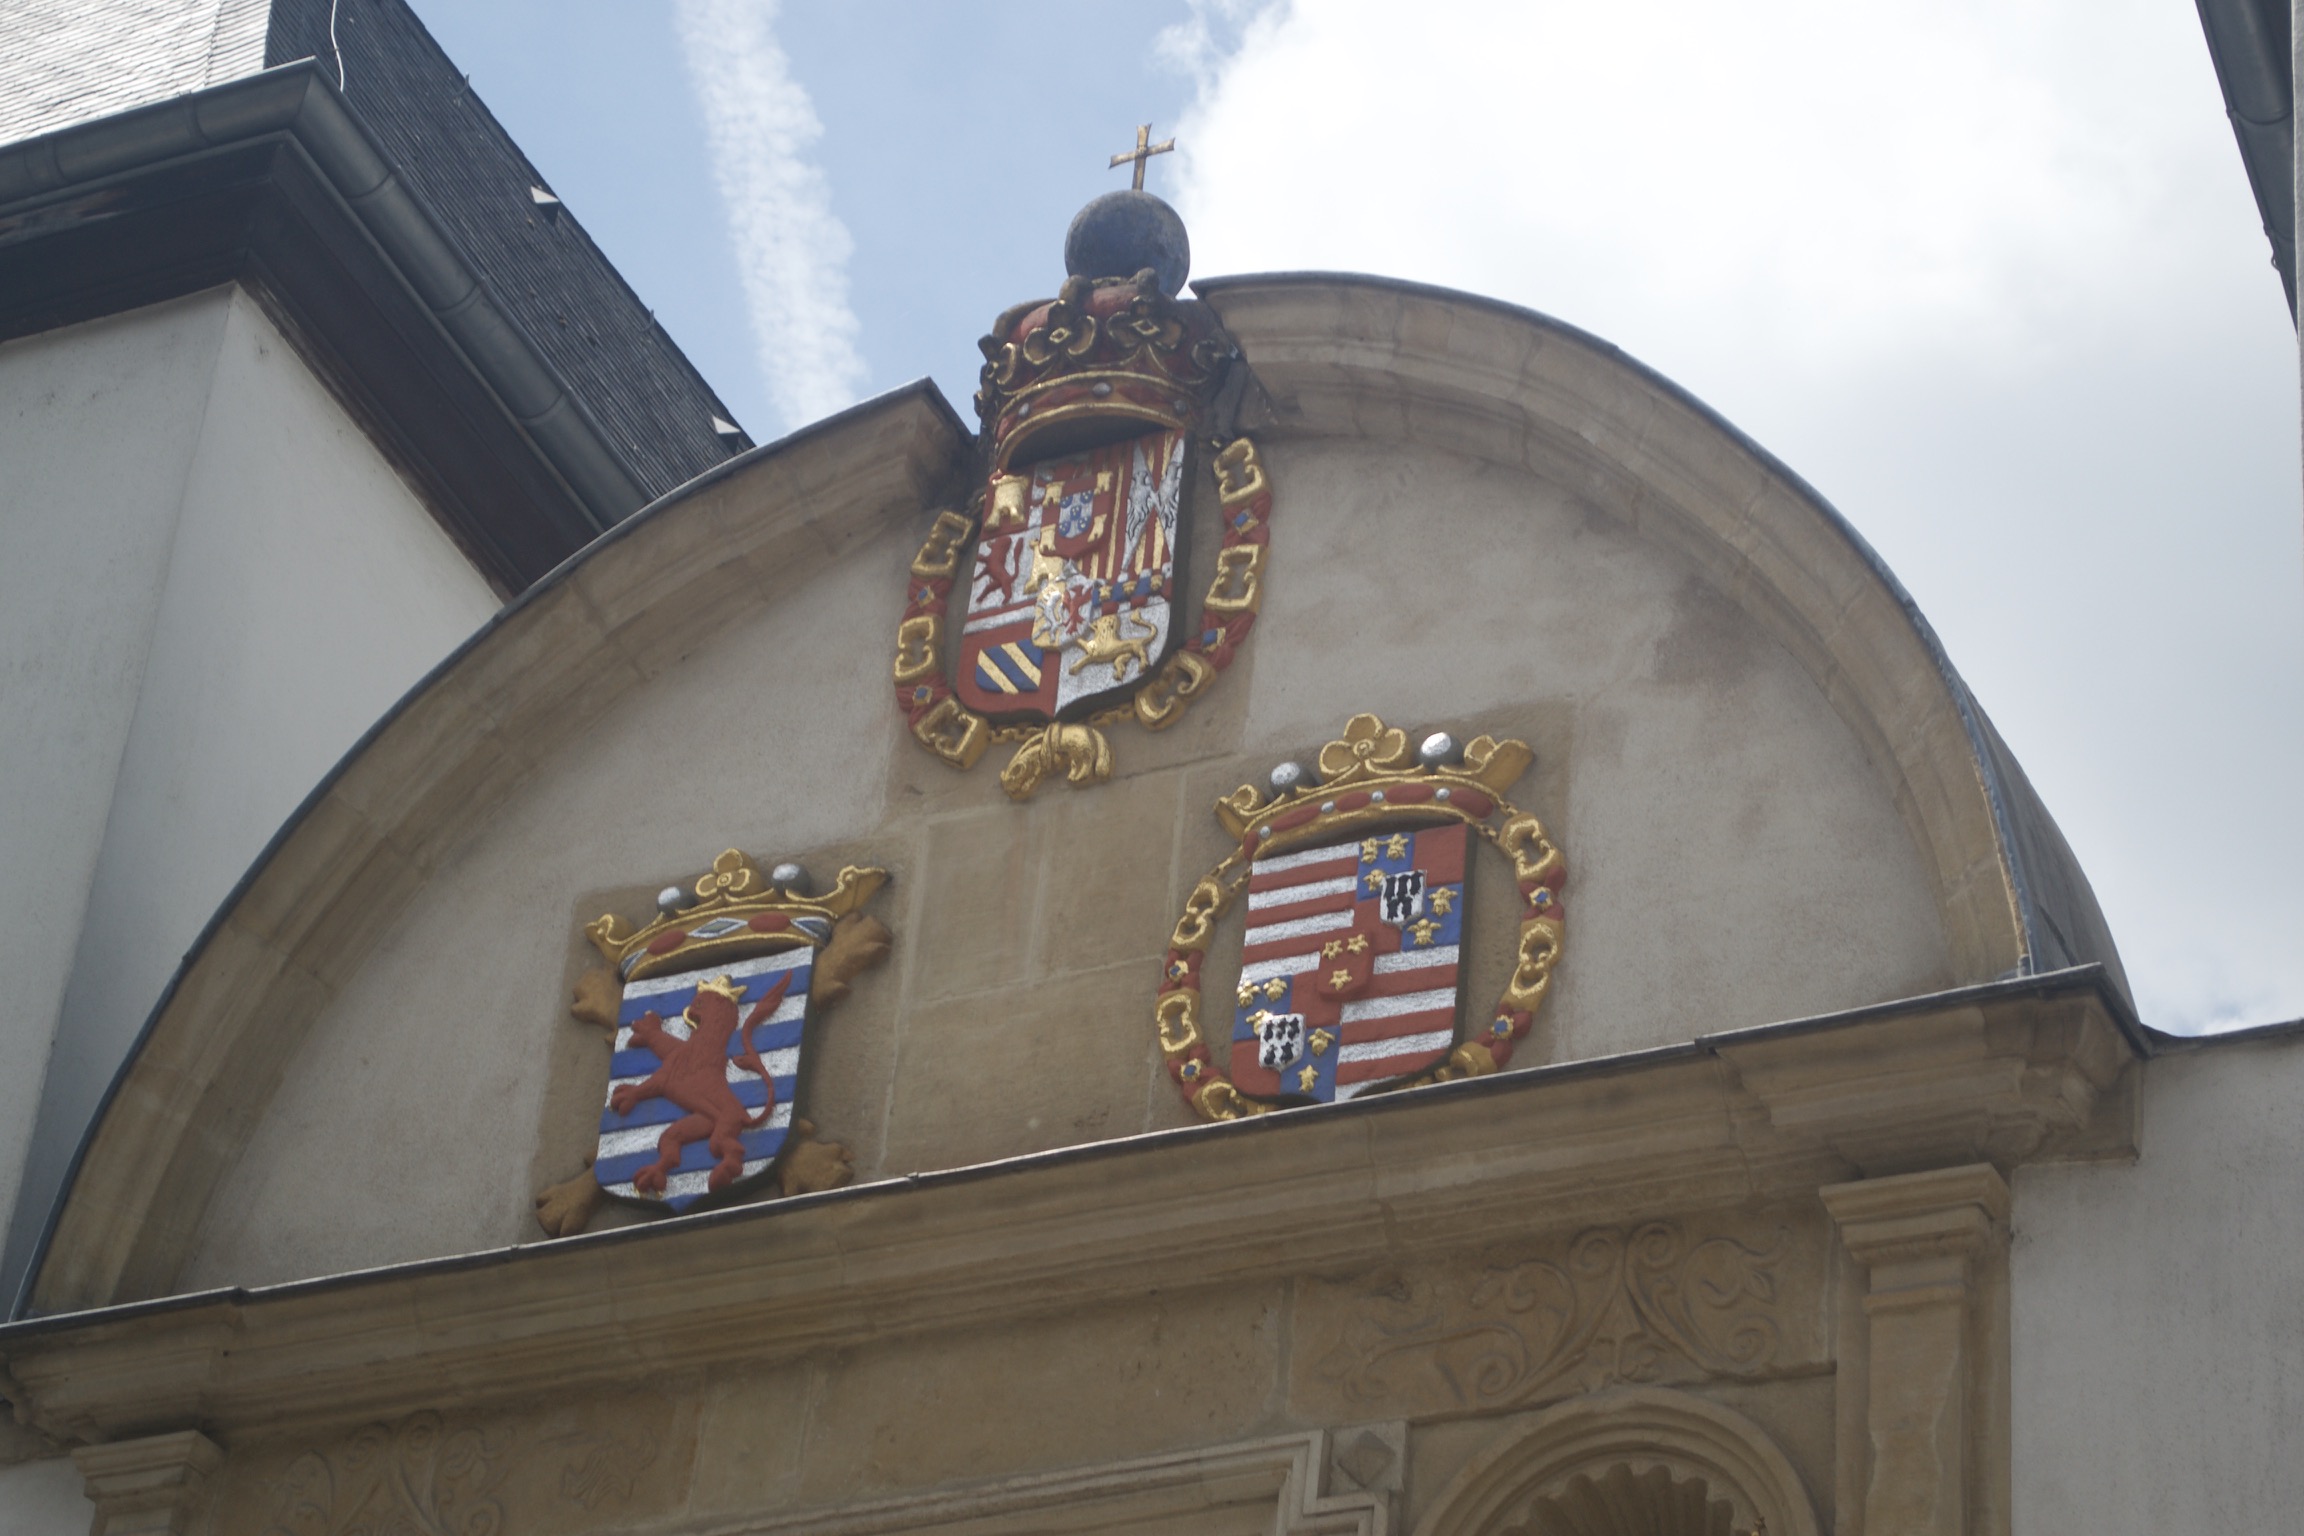 Three coats of arms, all red, yellow, and gold with lions, star, stripes, and crowns on a brown stone building.